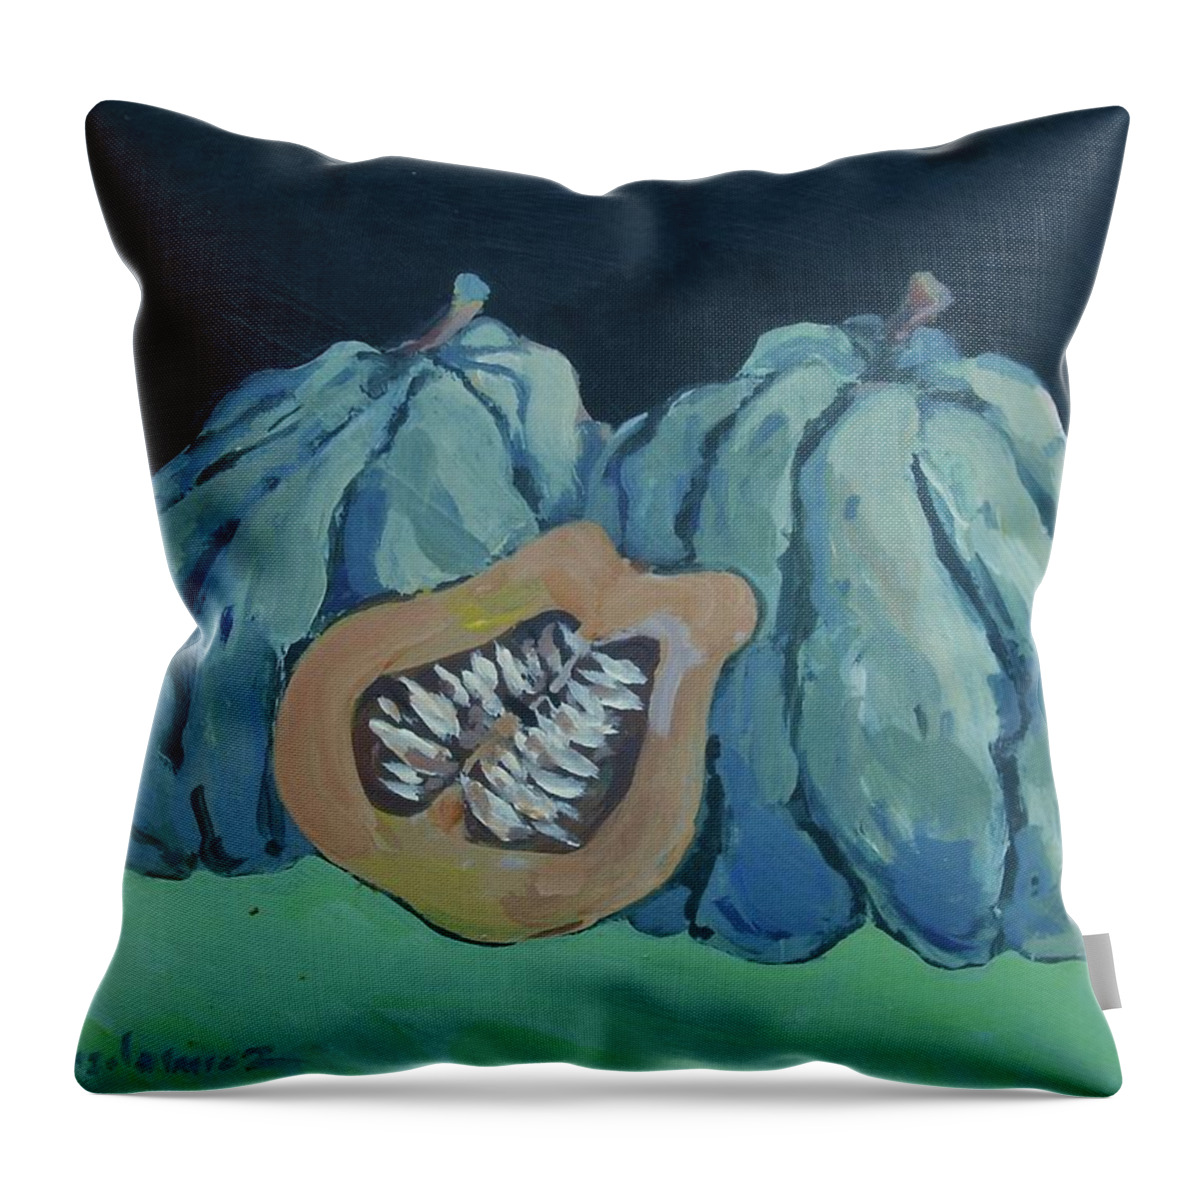 Vegetable Food Throw Pillow featuring the painting Squash by Andrew Drozdowicz